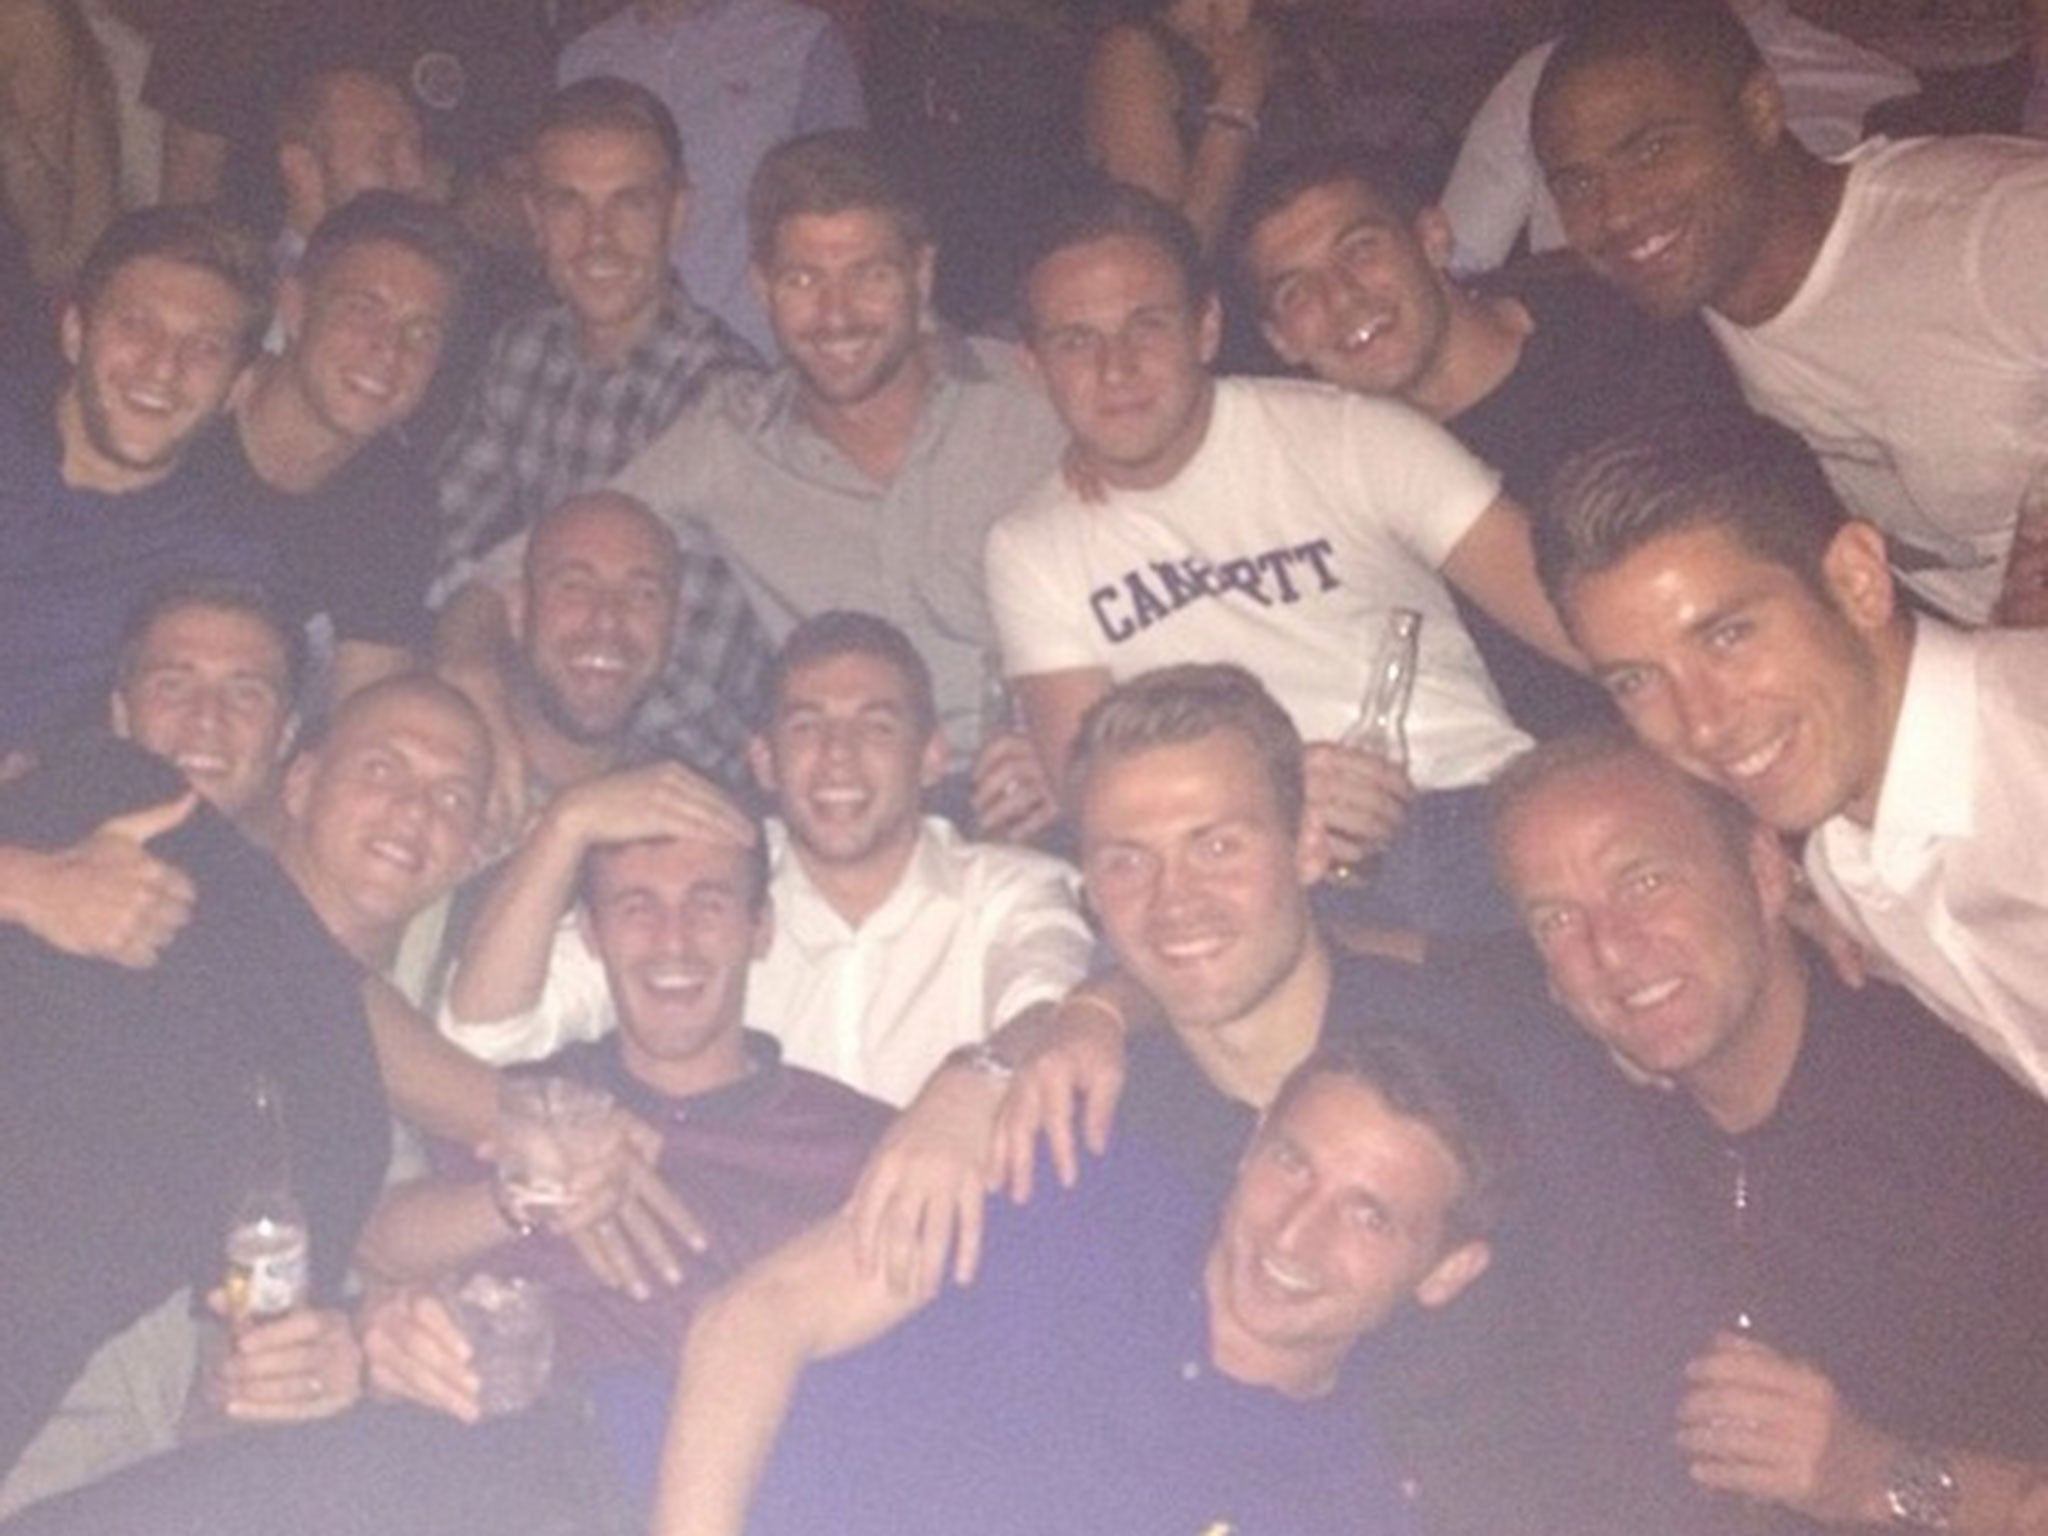 The Liverpool squad enjoying a night out in New York